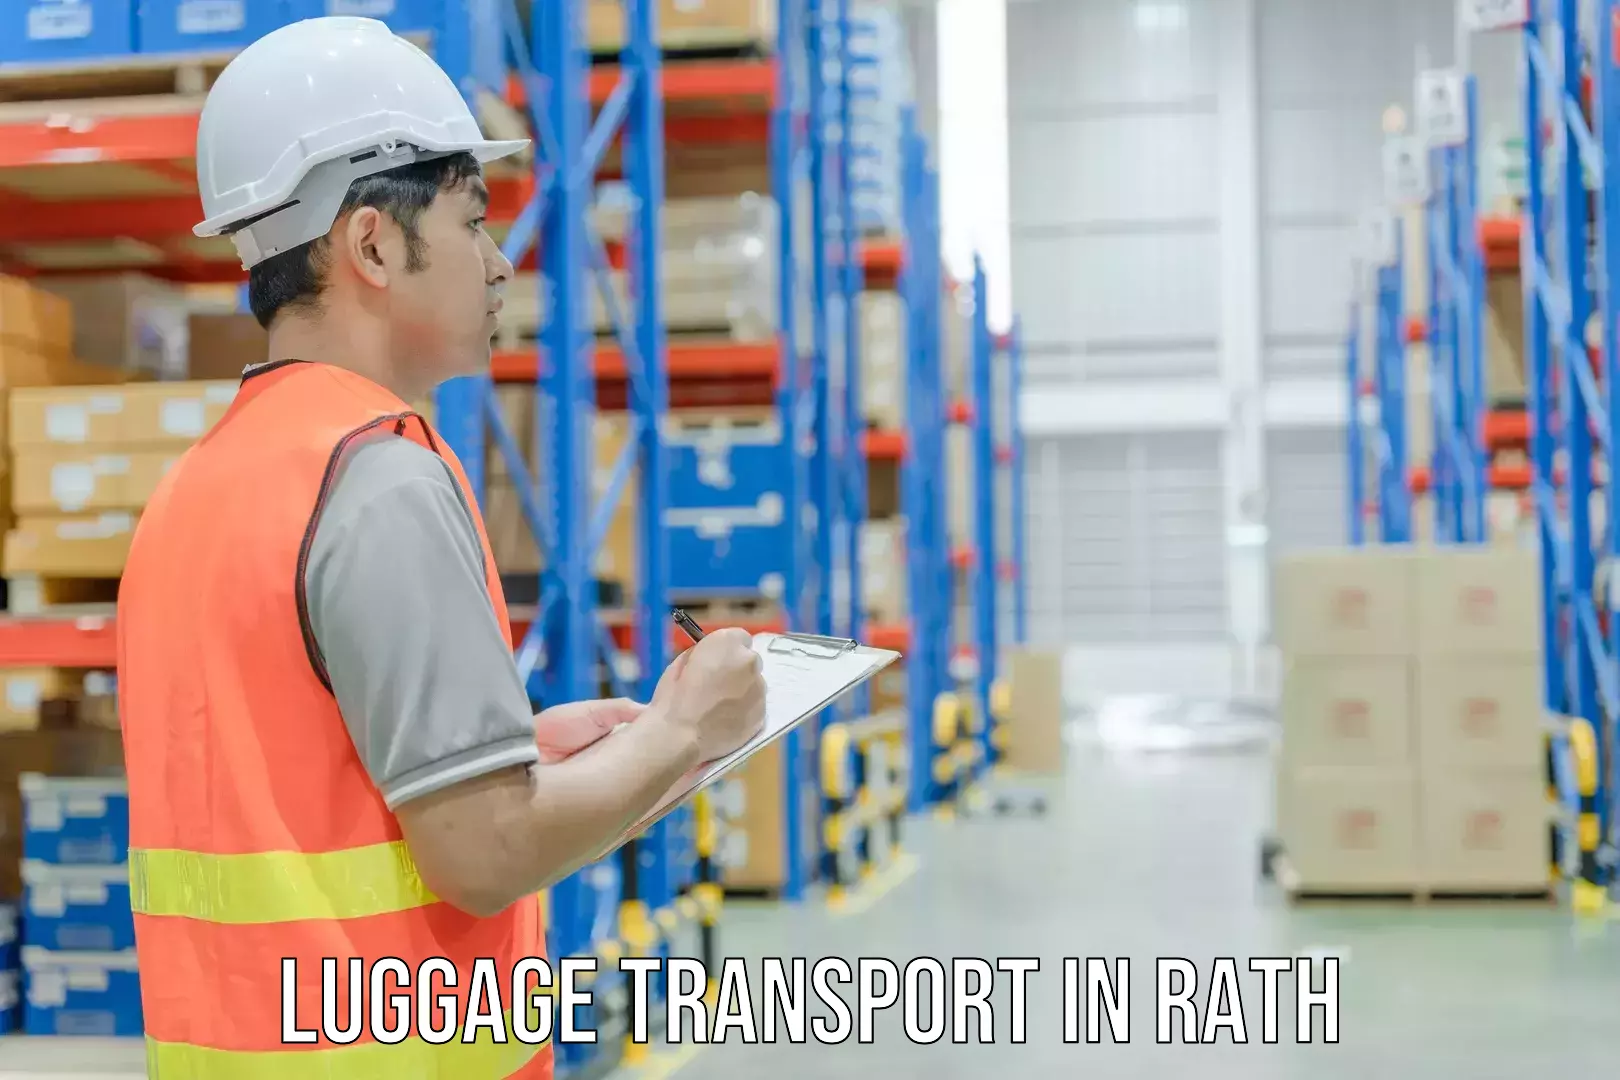 Luggage transport service in Rath